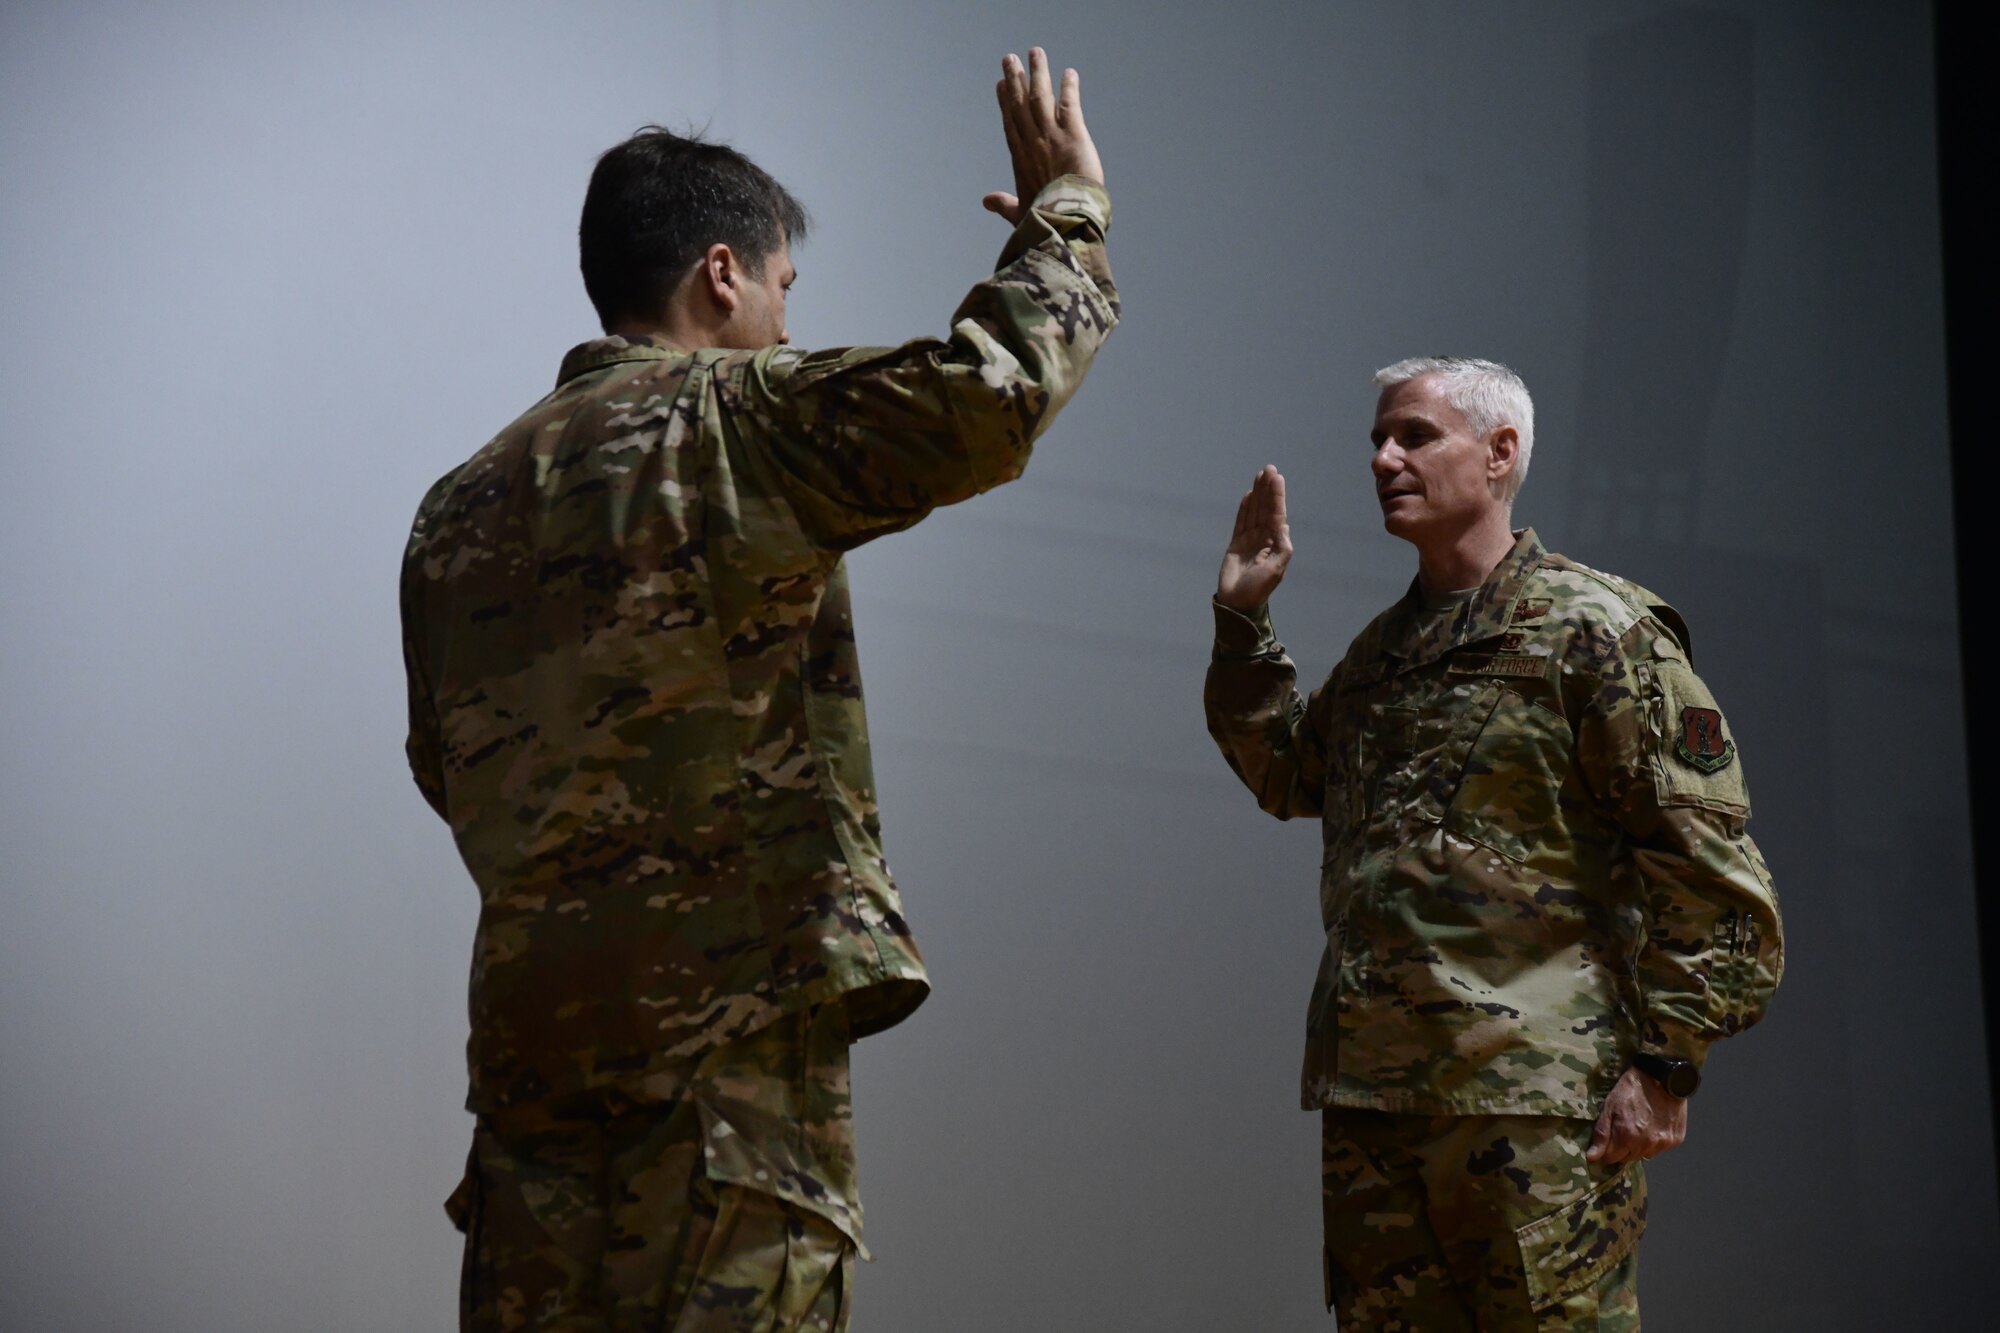 Brig. Gen. Mark A. Maldonado, Deputy Commanding General, Air for the District of Columbia Air National Guard, promotes Col. Keith MacDonald, 113th Wing Commander to the rank of brigadier general the Joint Base Andrews Base Theater, June 9, 2019. (U.S. Air National Guard photo by Staff Sgt. Anthony Small)